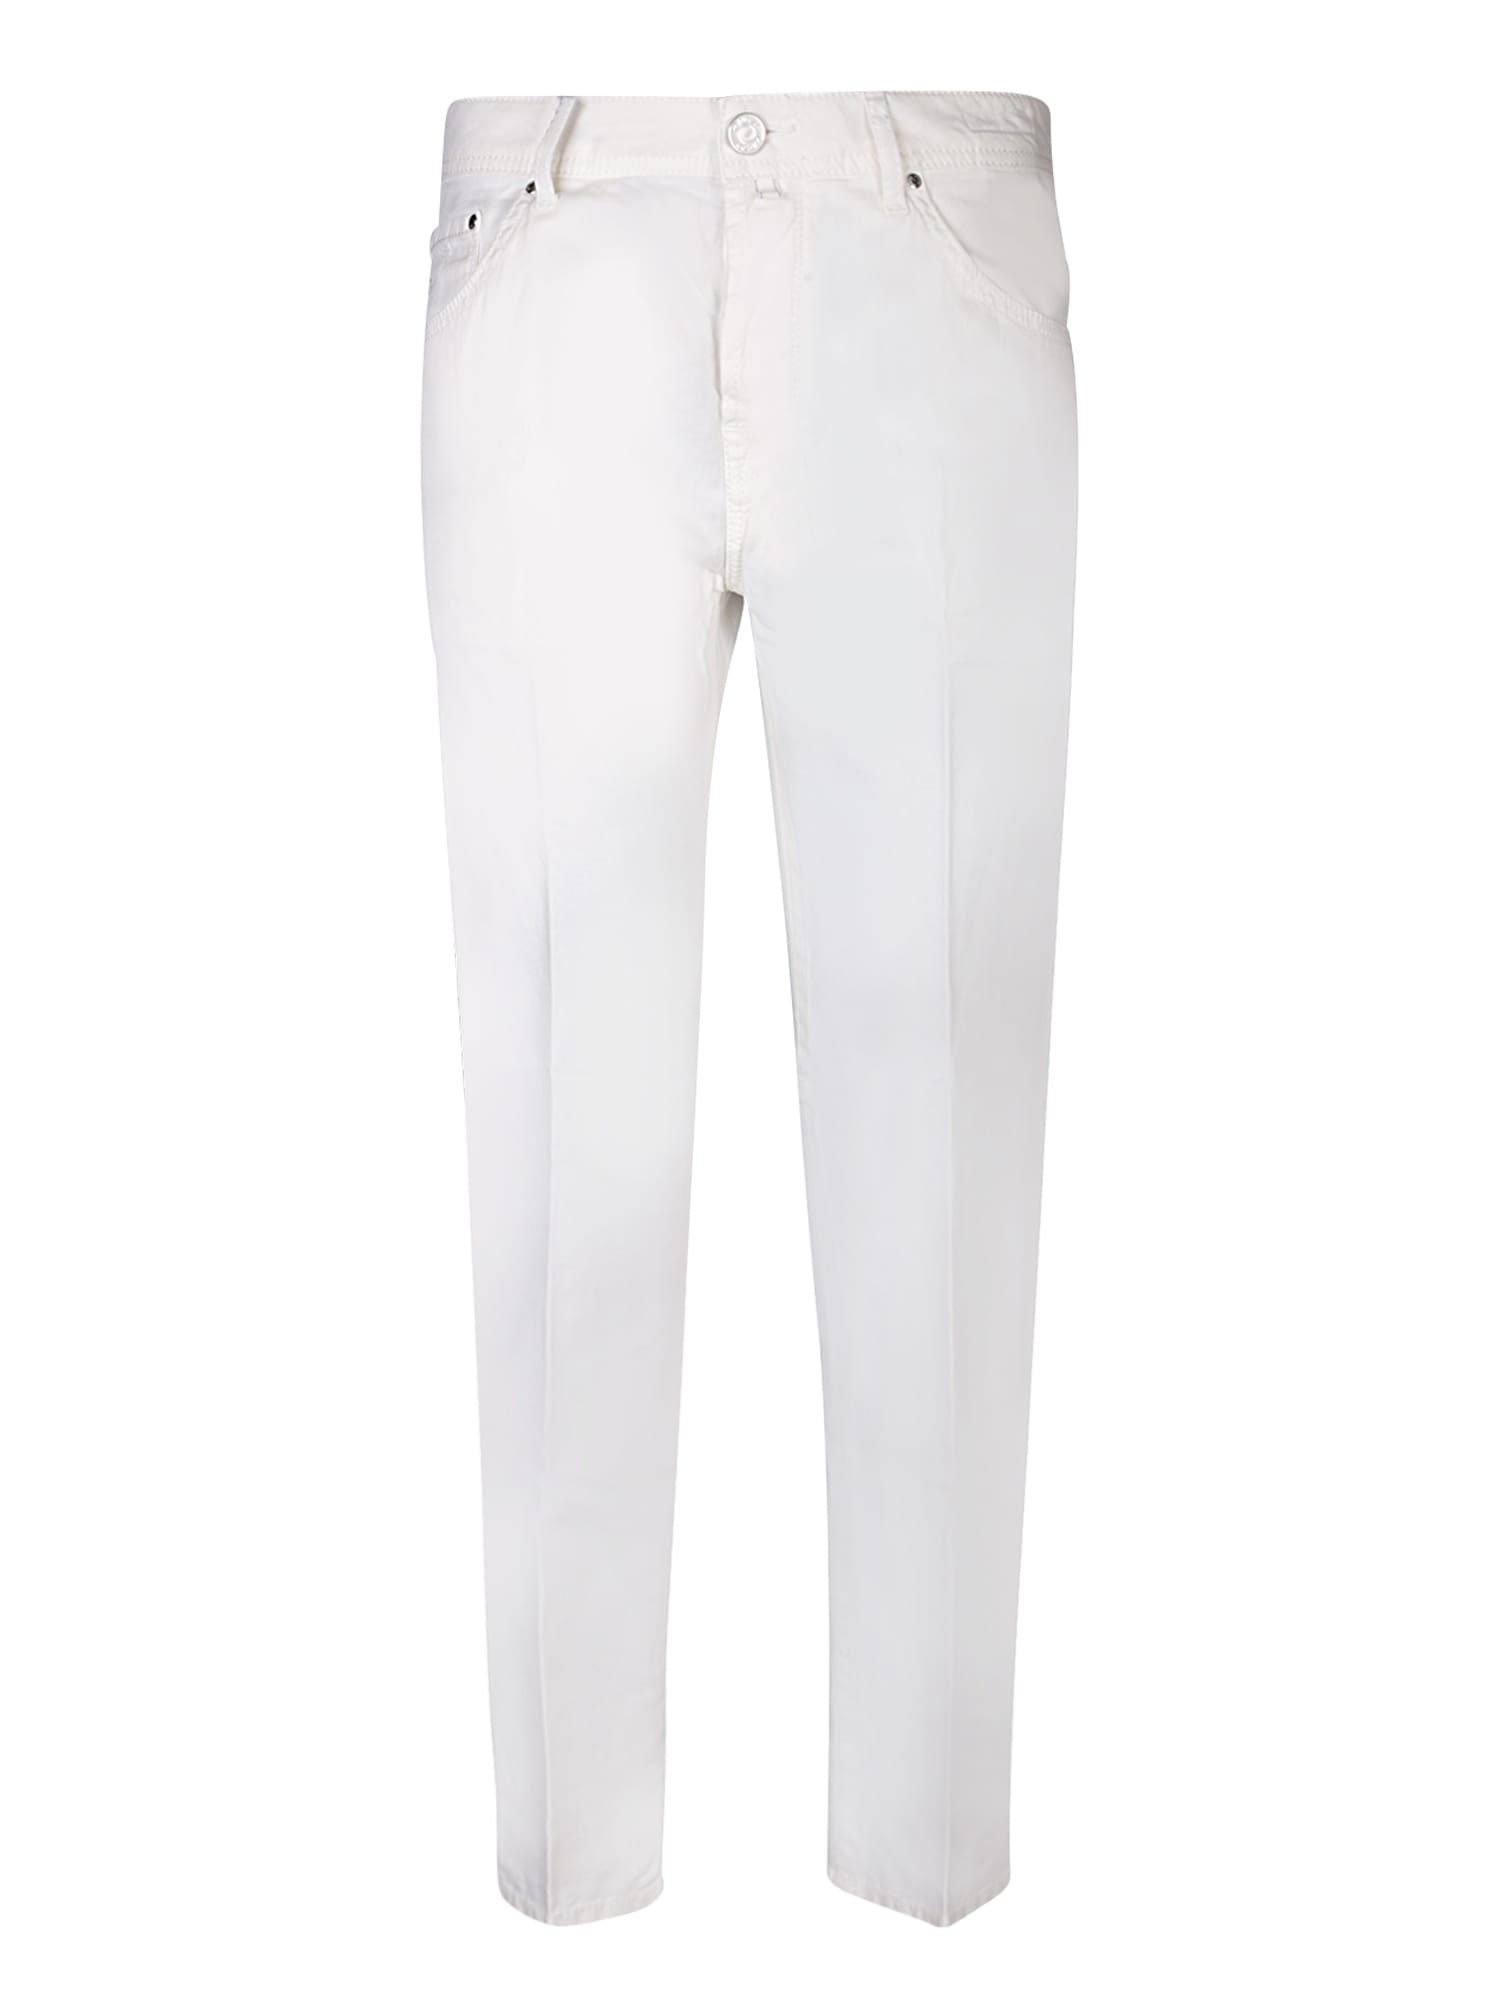 Shop Jacob Cohen Carrot Scott Chambray Cream Trousers In White